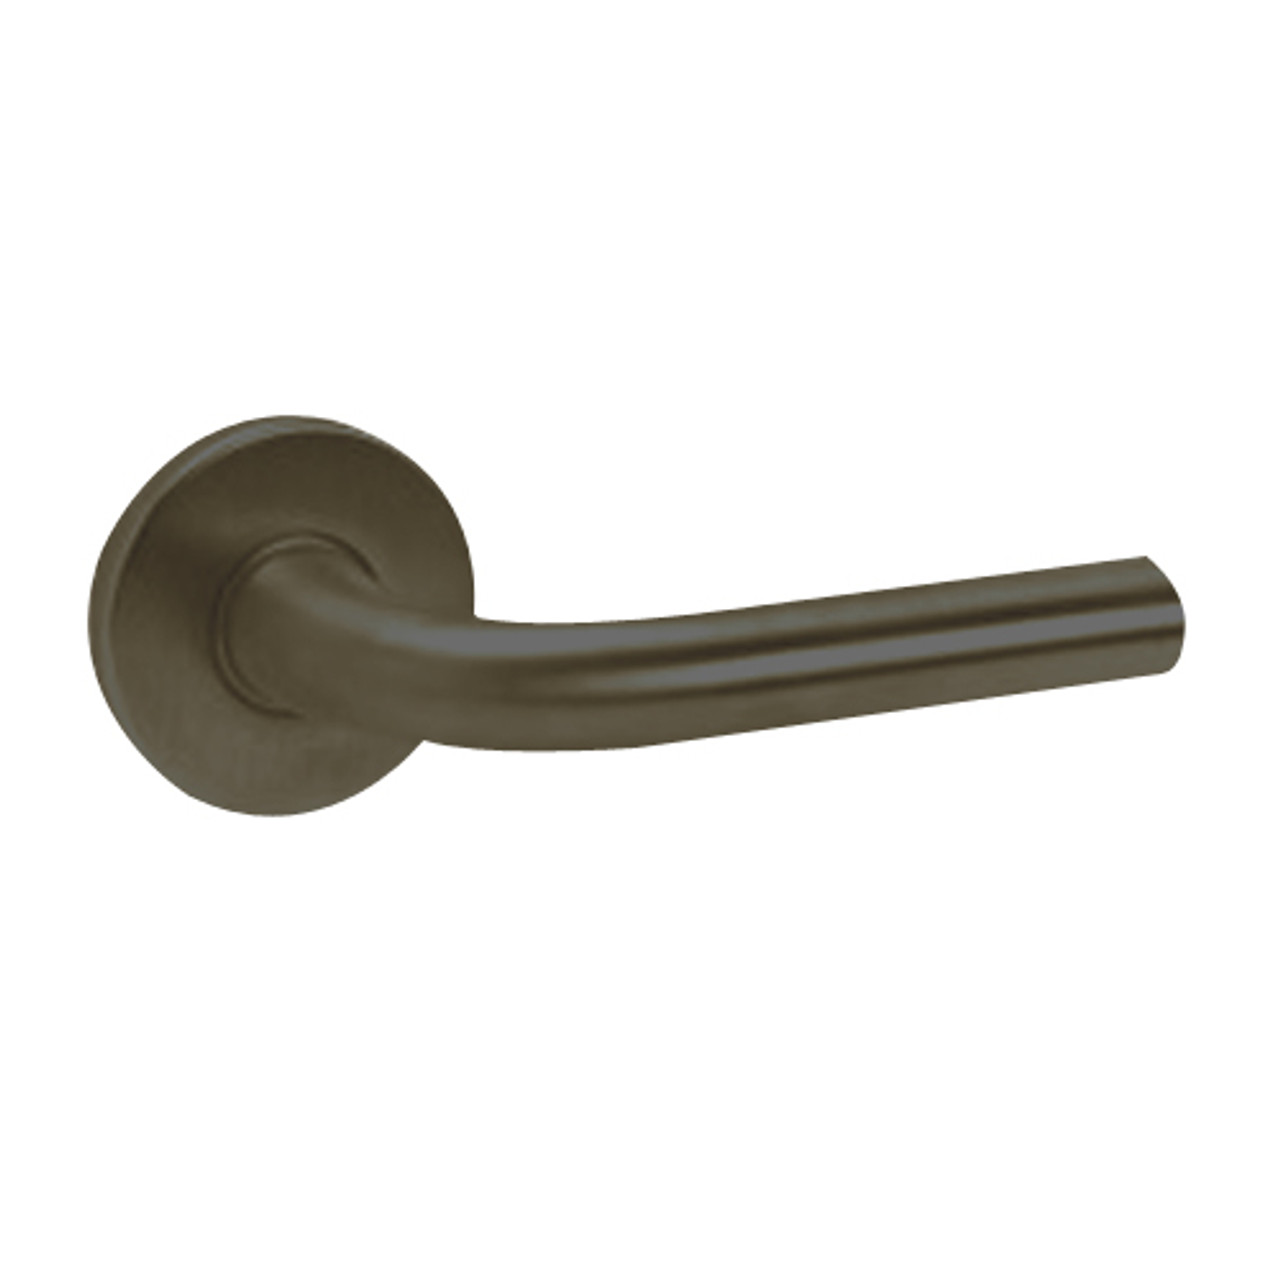 ML2058-RWA-613-CL7 Corbin Russwin ML2000 Series IC 7-Pin Less Core Mortise Entrance Holdback Locksets with Regis Lever in Oil Rubbed Bronze